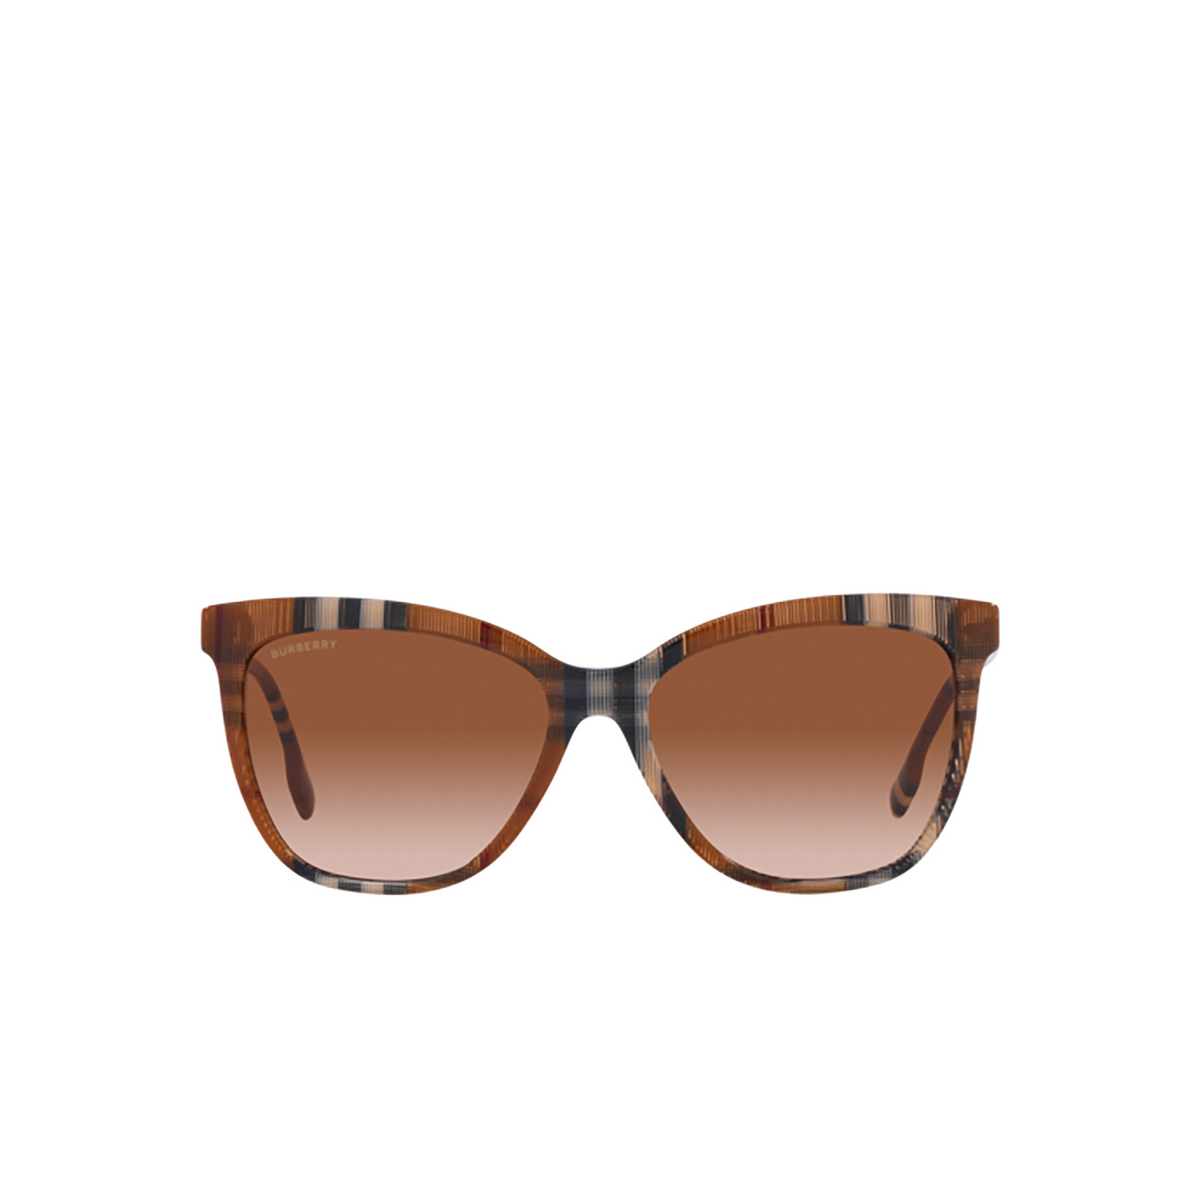 Burberry CLARE Sunglasses 400513 Check Brown - front view